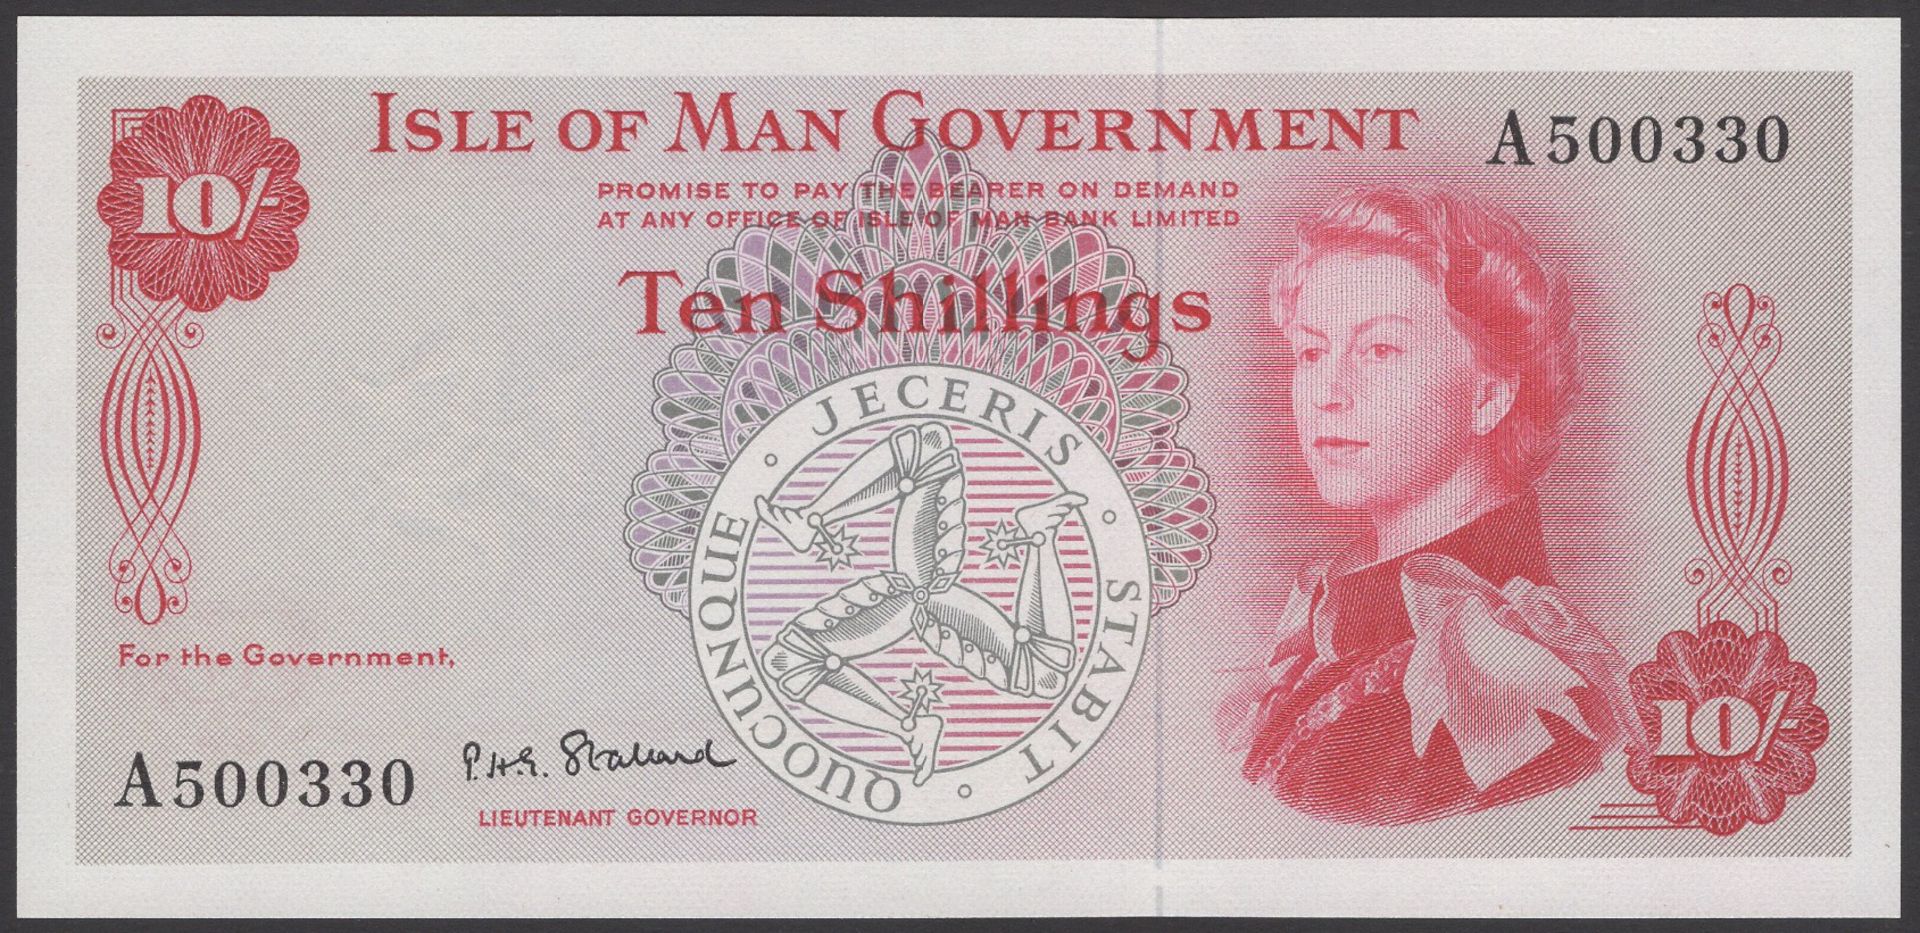 Isle of Man Government, P.H.G. Stallard, 10 Shillings, ND (1969), serial number A500330, a l...